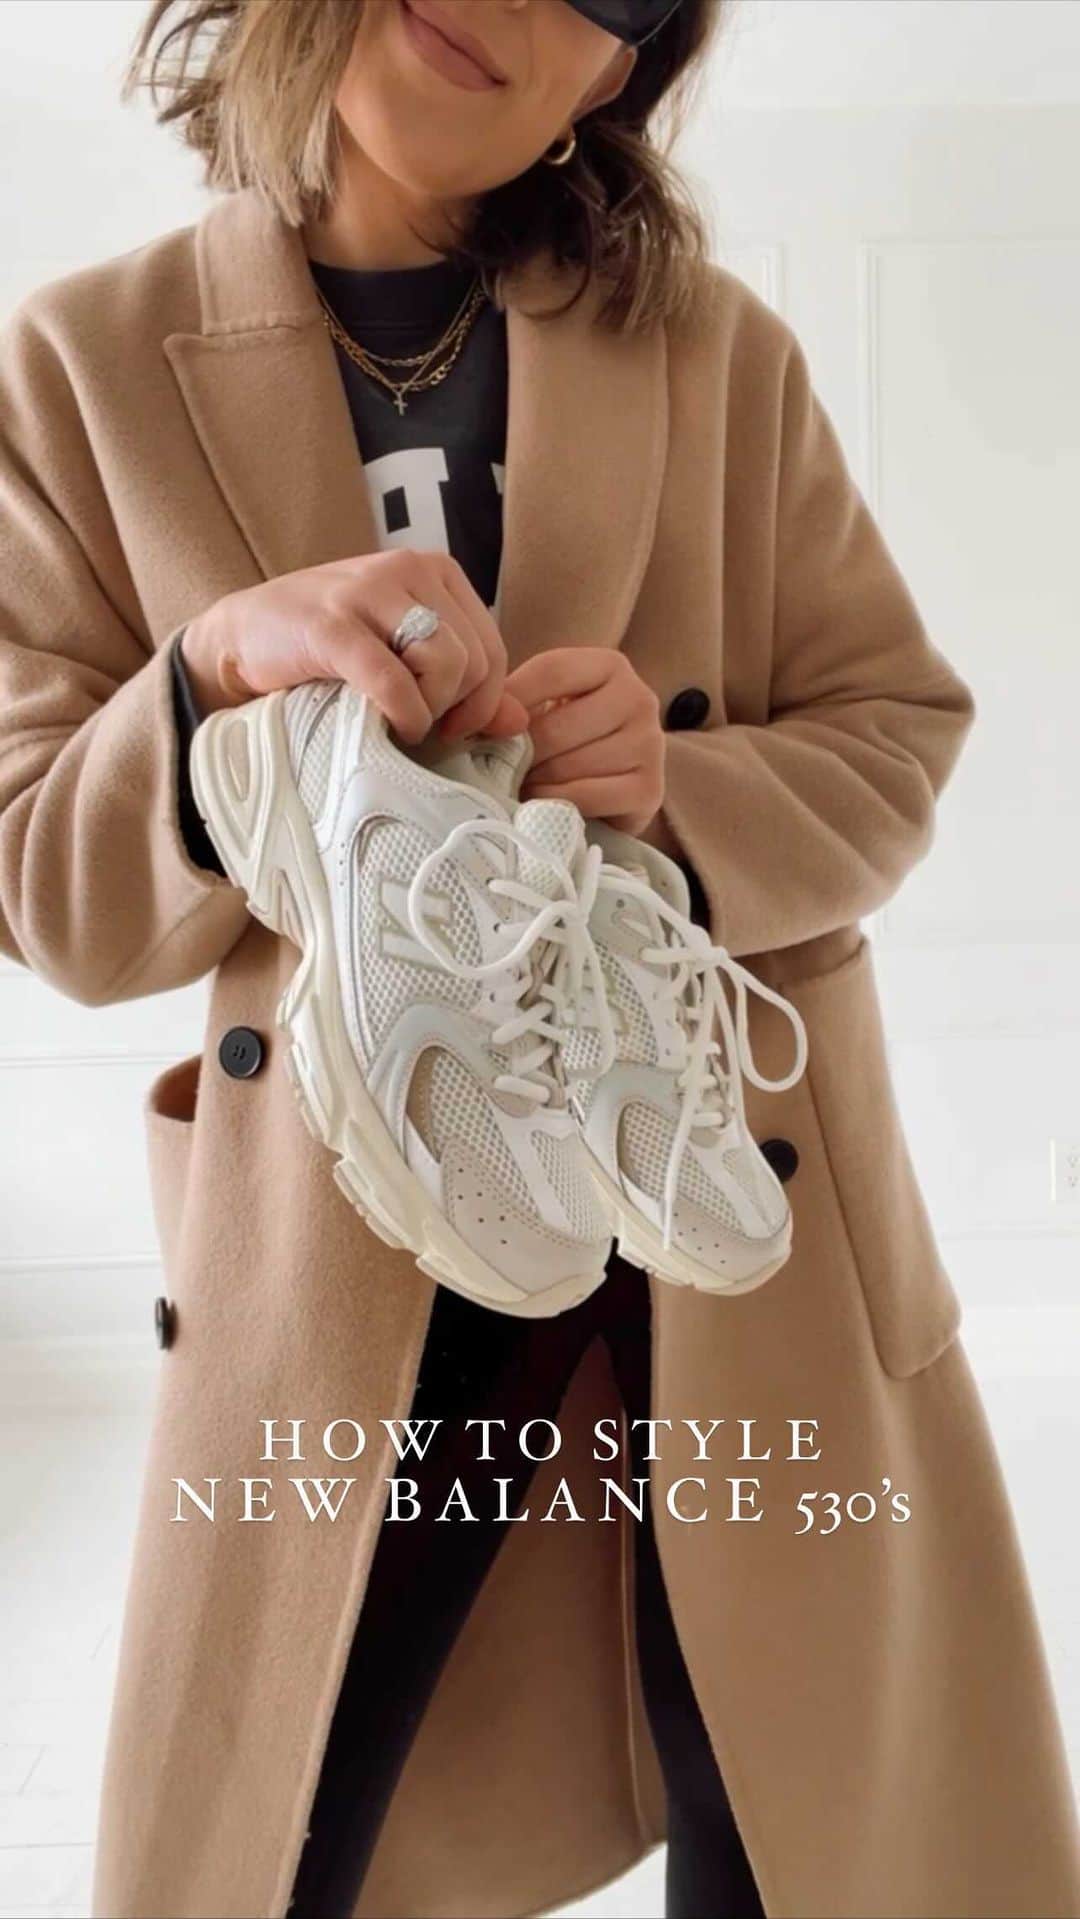 Stephanie Sterjovskiのインスタグラム：「14 year old me is thrilled this song is trending 🎶 & 32 year old me is thrilled about my new mom shoes 😎 let me know if you want more style vids in between holistic nutrition content in the comments (you get a little bit of everything here lol) 😜 #newbalance530 #momshoes #elevatedmomstyle #momstyle // Outfits linked on my LTK page: https://liketk.it/45a0s #ltkshoecrush #ltkstyletip」